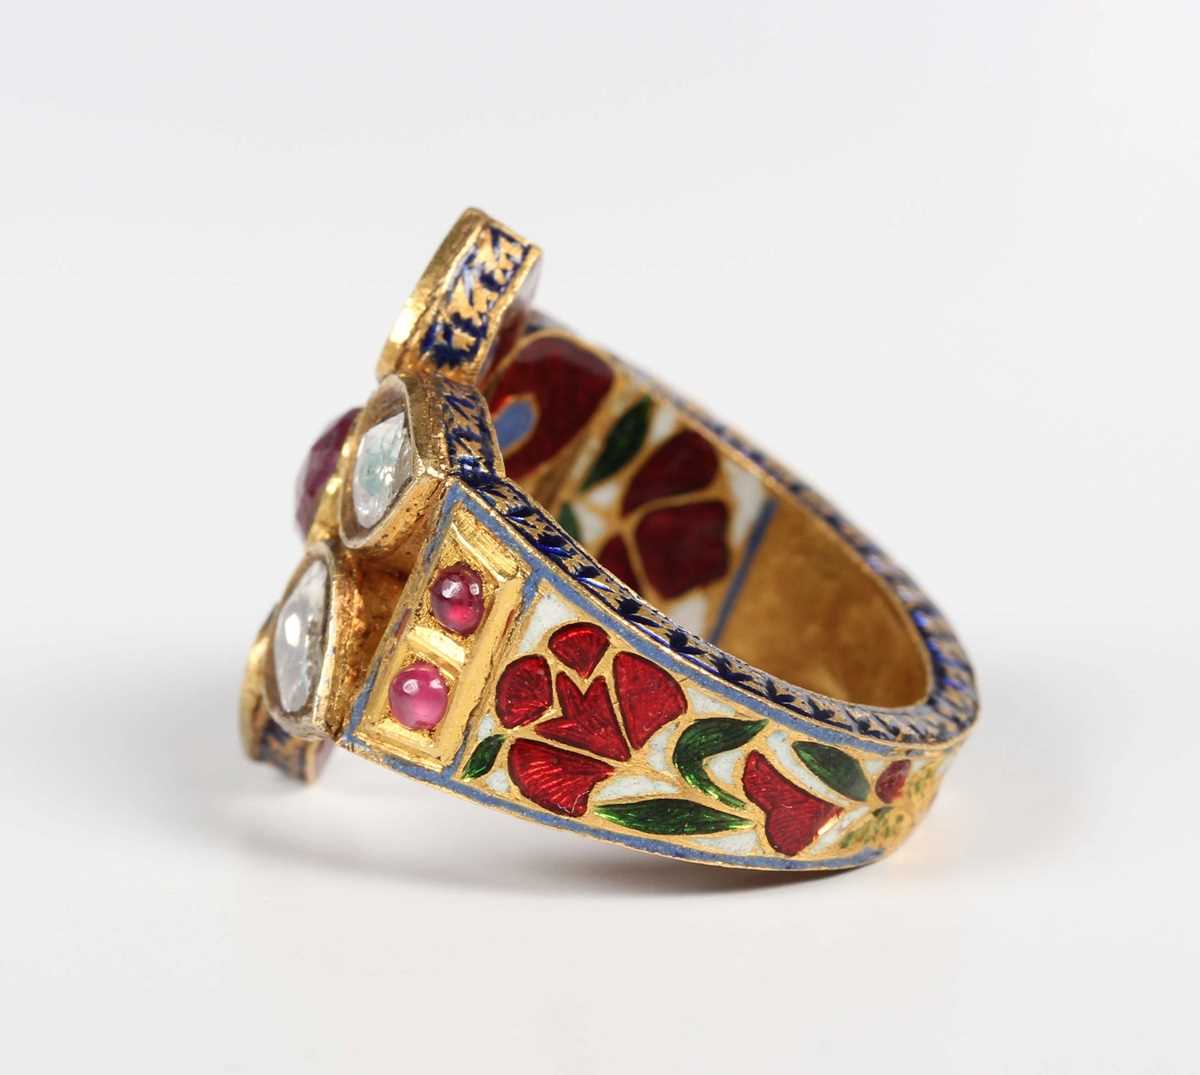 A Middle Eastern gold, ruby, diamond and varicoloured enamelled ring, probably Indian, designed as a - Image 3 of 6